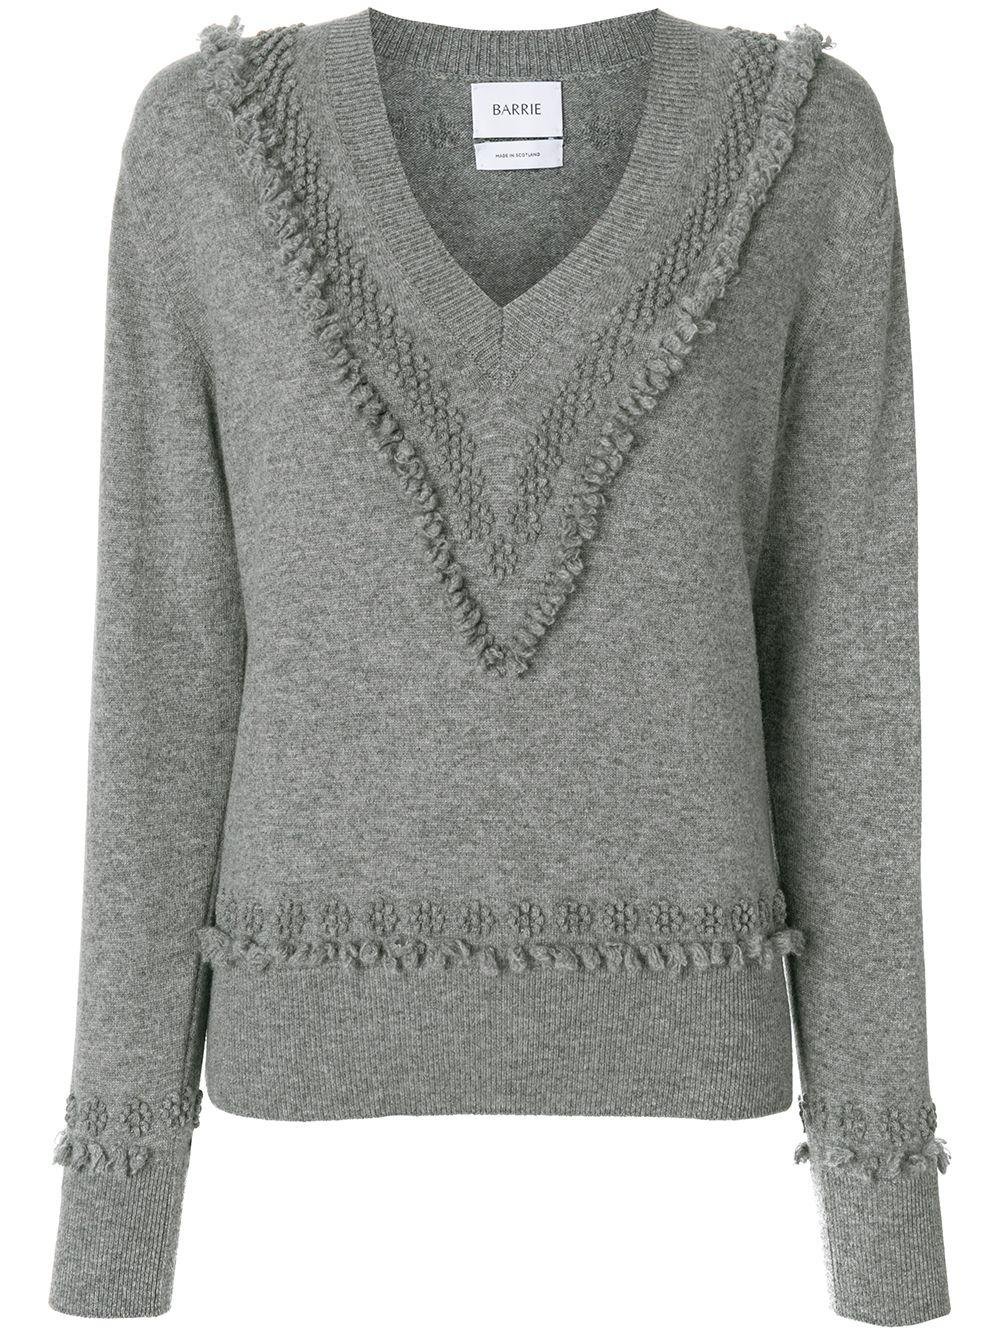 Romantic Timeless cashmere V neck pullover by BARRIE